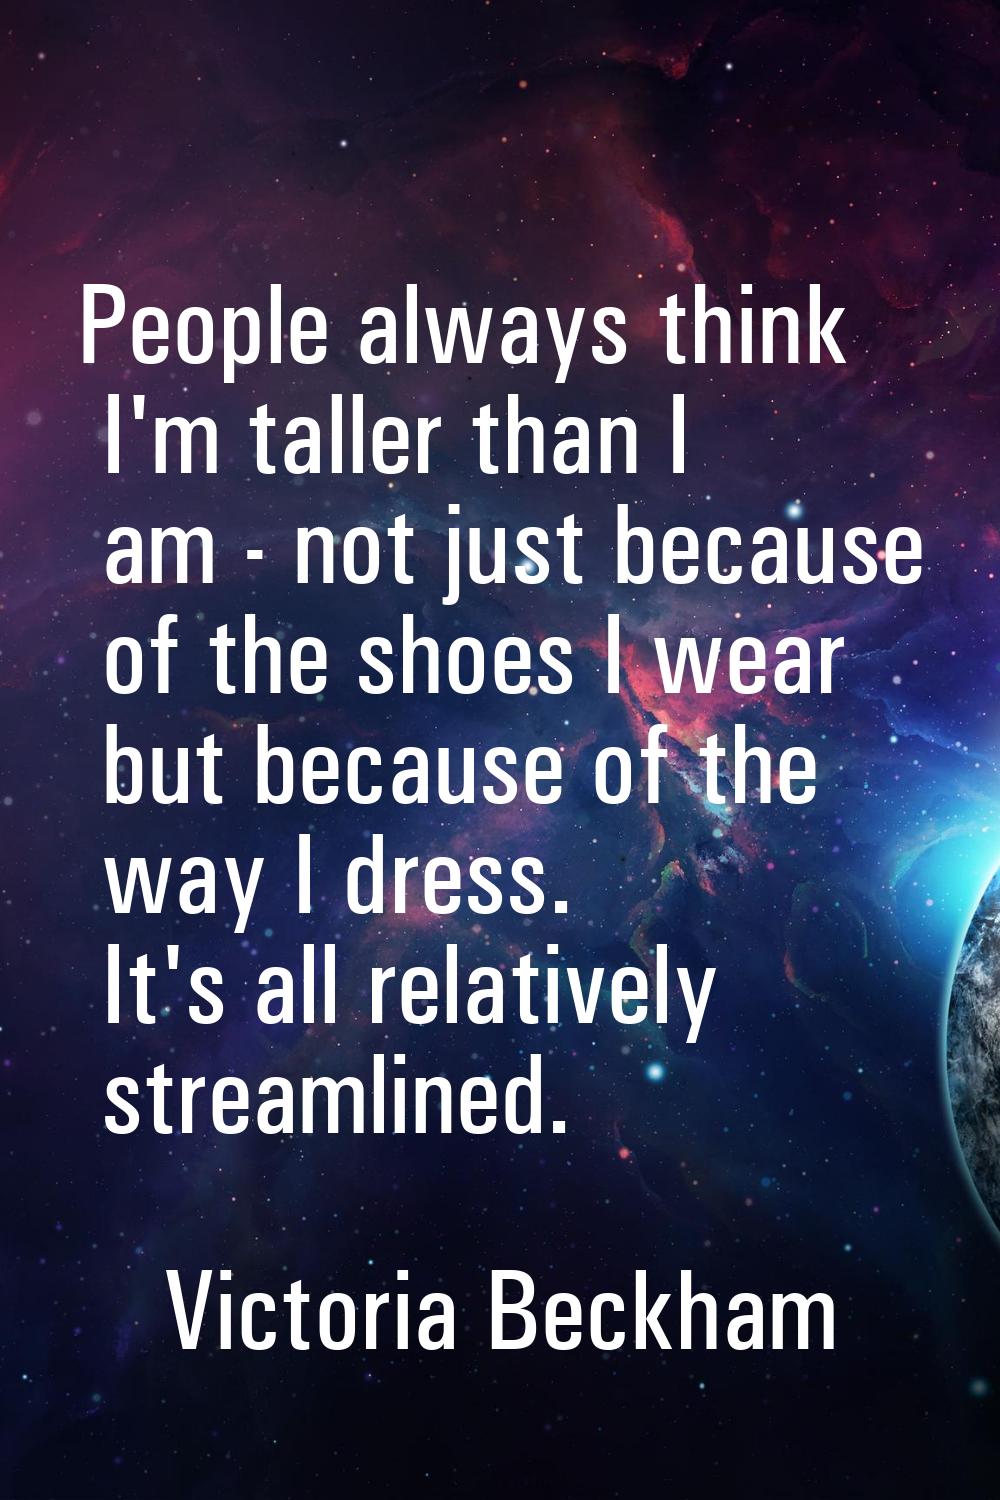 People always think I'm taller than I am - not just because of the shoes I wear but because of the 